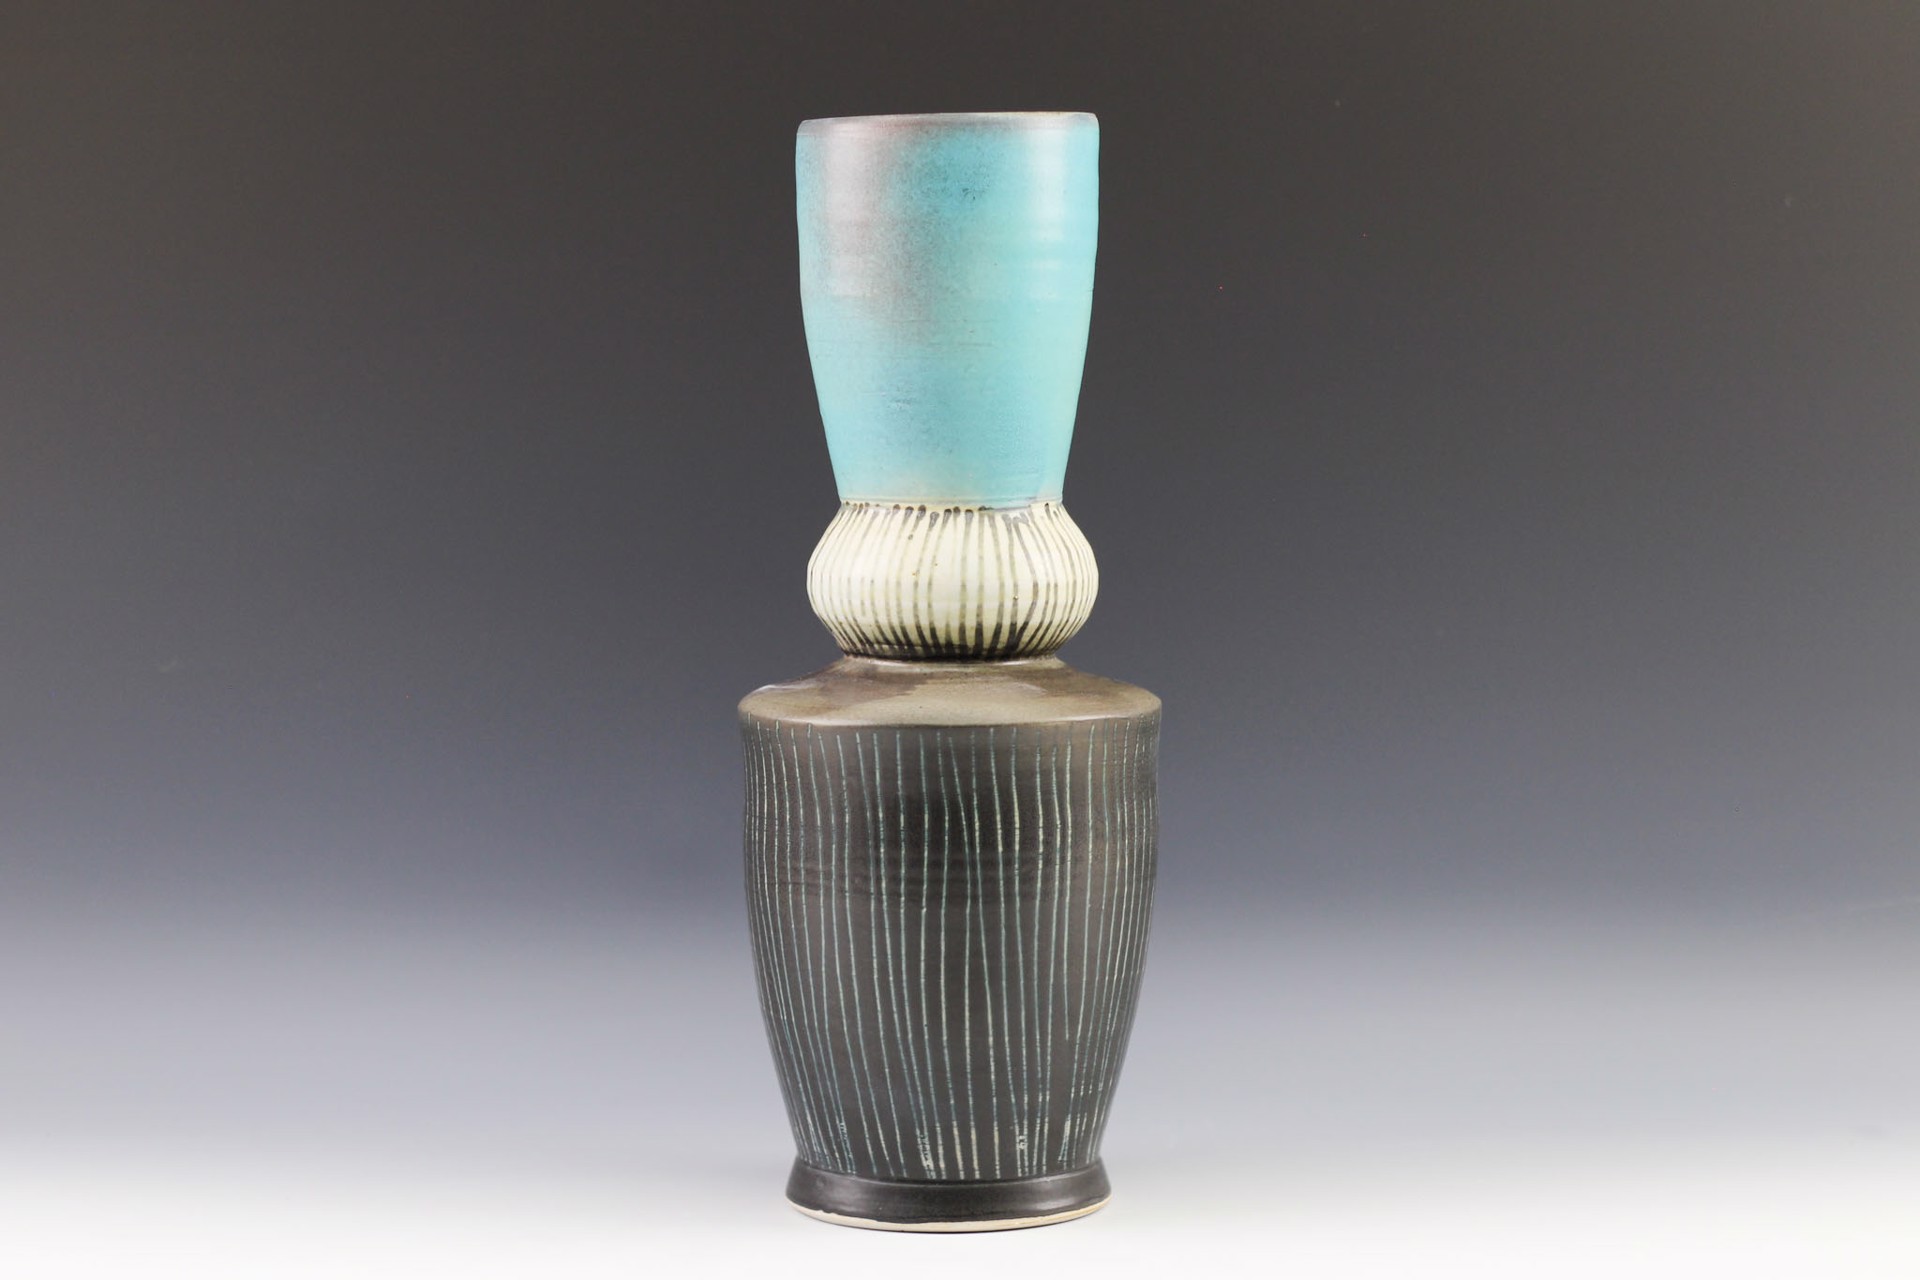 Tall Vase by Delores Fortuna